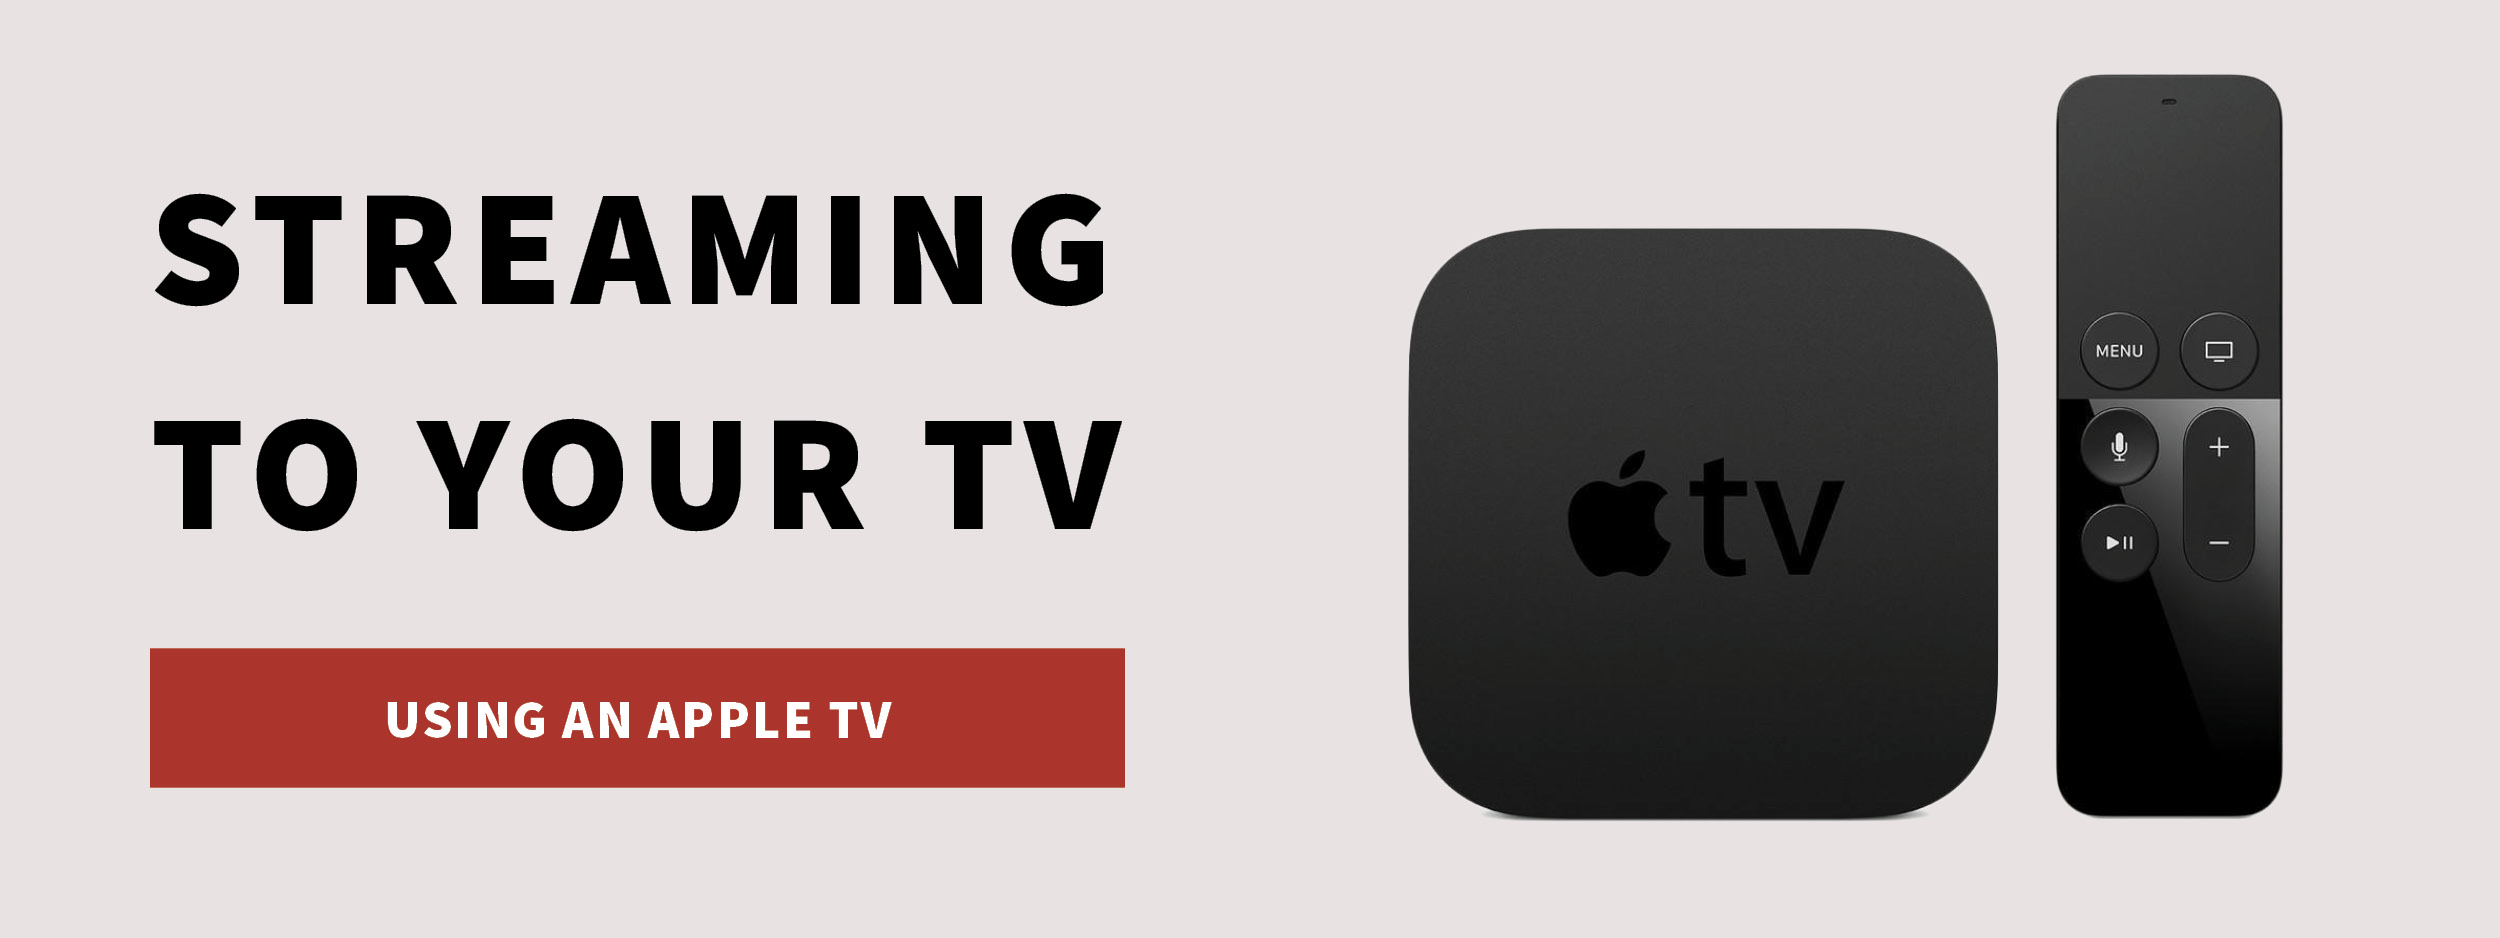 endelse frakobling Aggressiv How to Stream to Your TV Using an Apple TV | RV Lifestyle & Repair